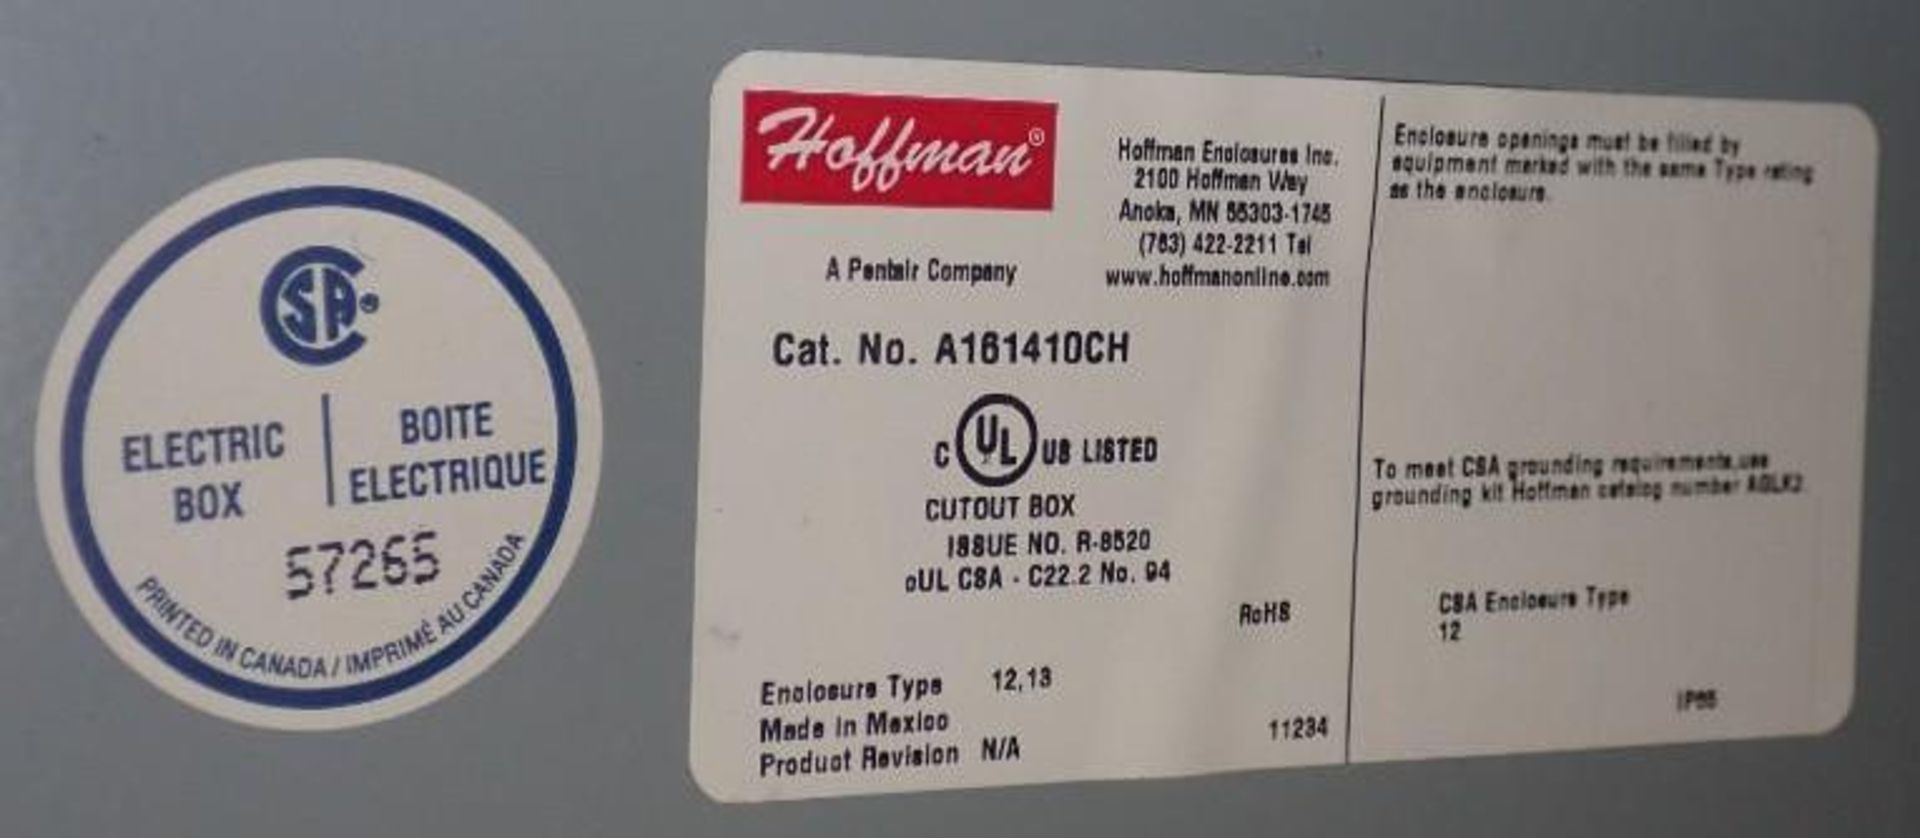 Lot of Hoffman Electrical Units - Image 6 of 9